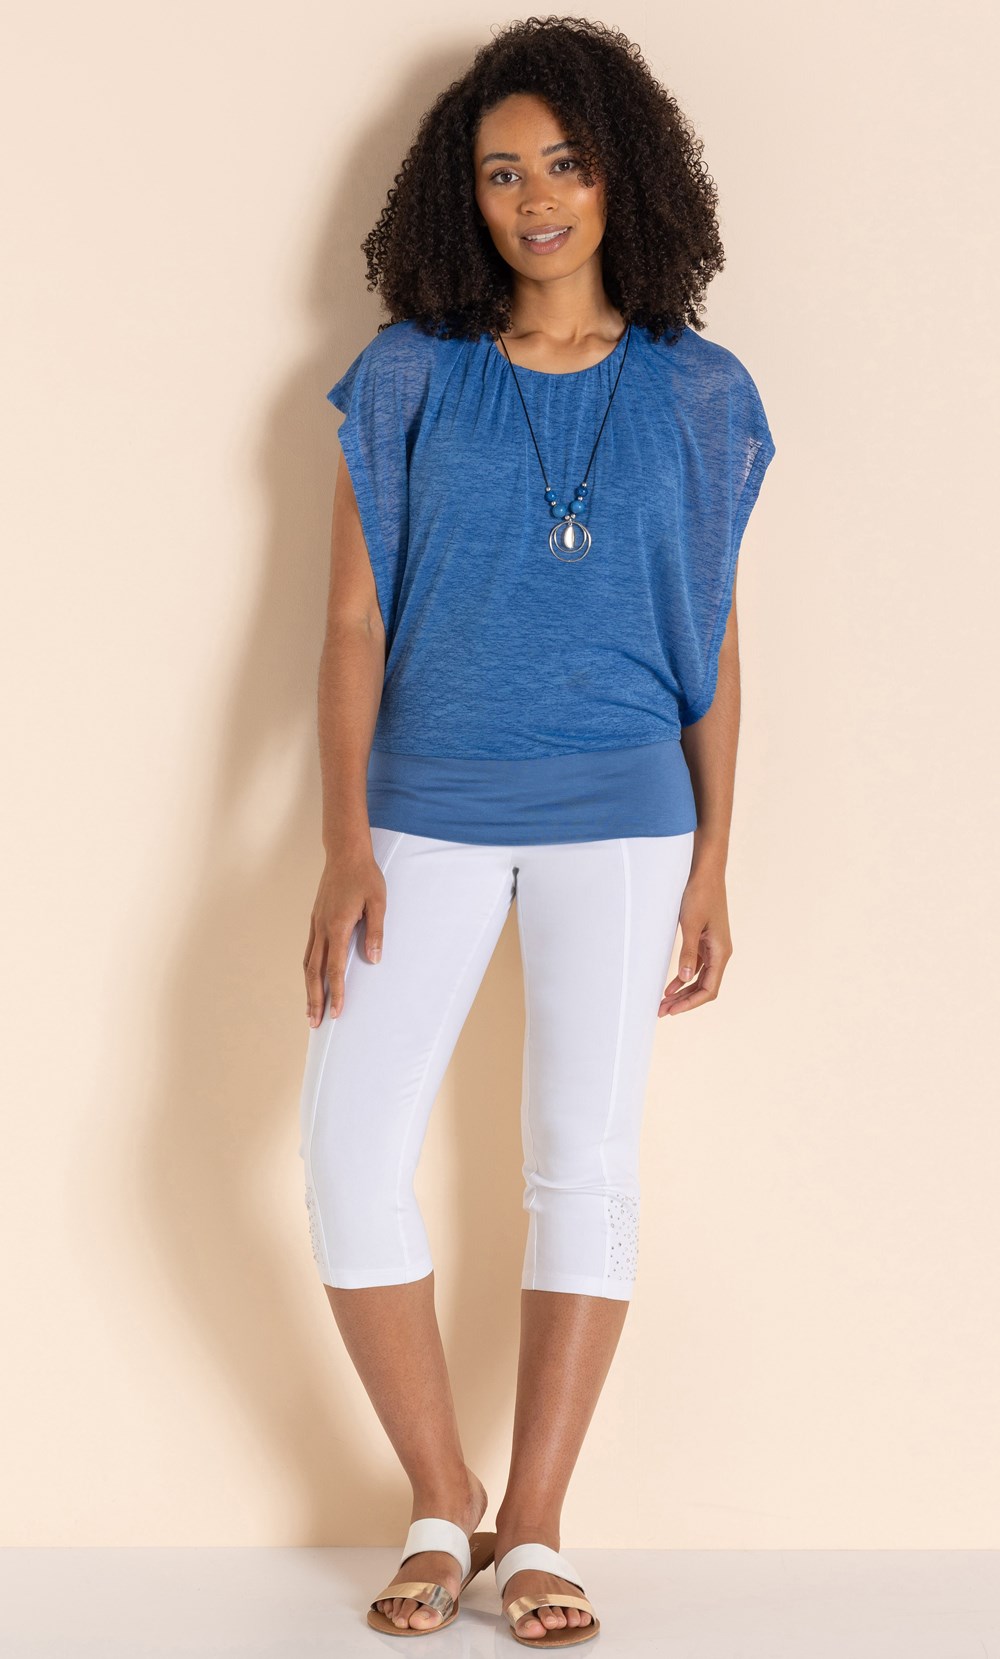 Jersey Layer Top With Necklace